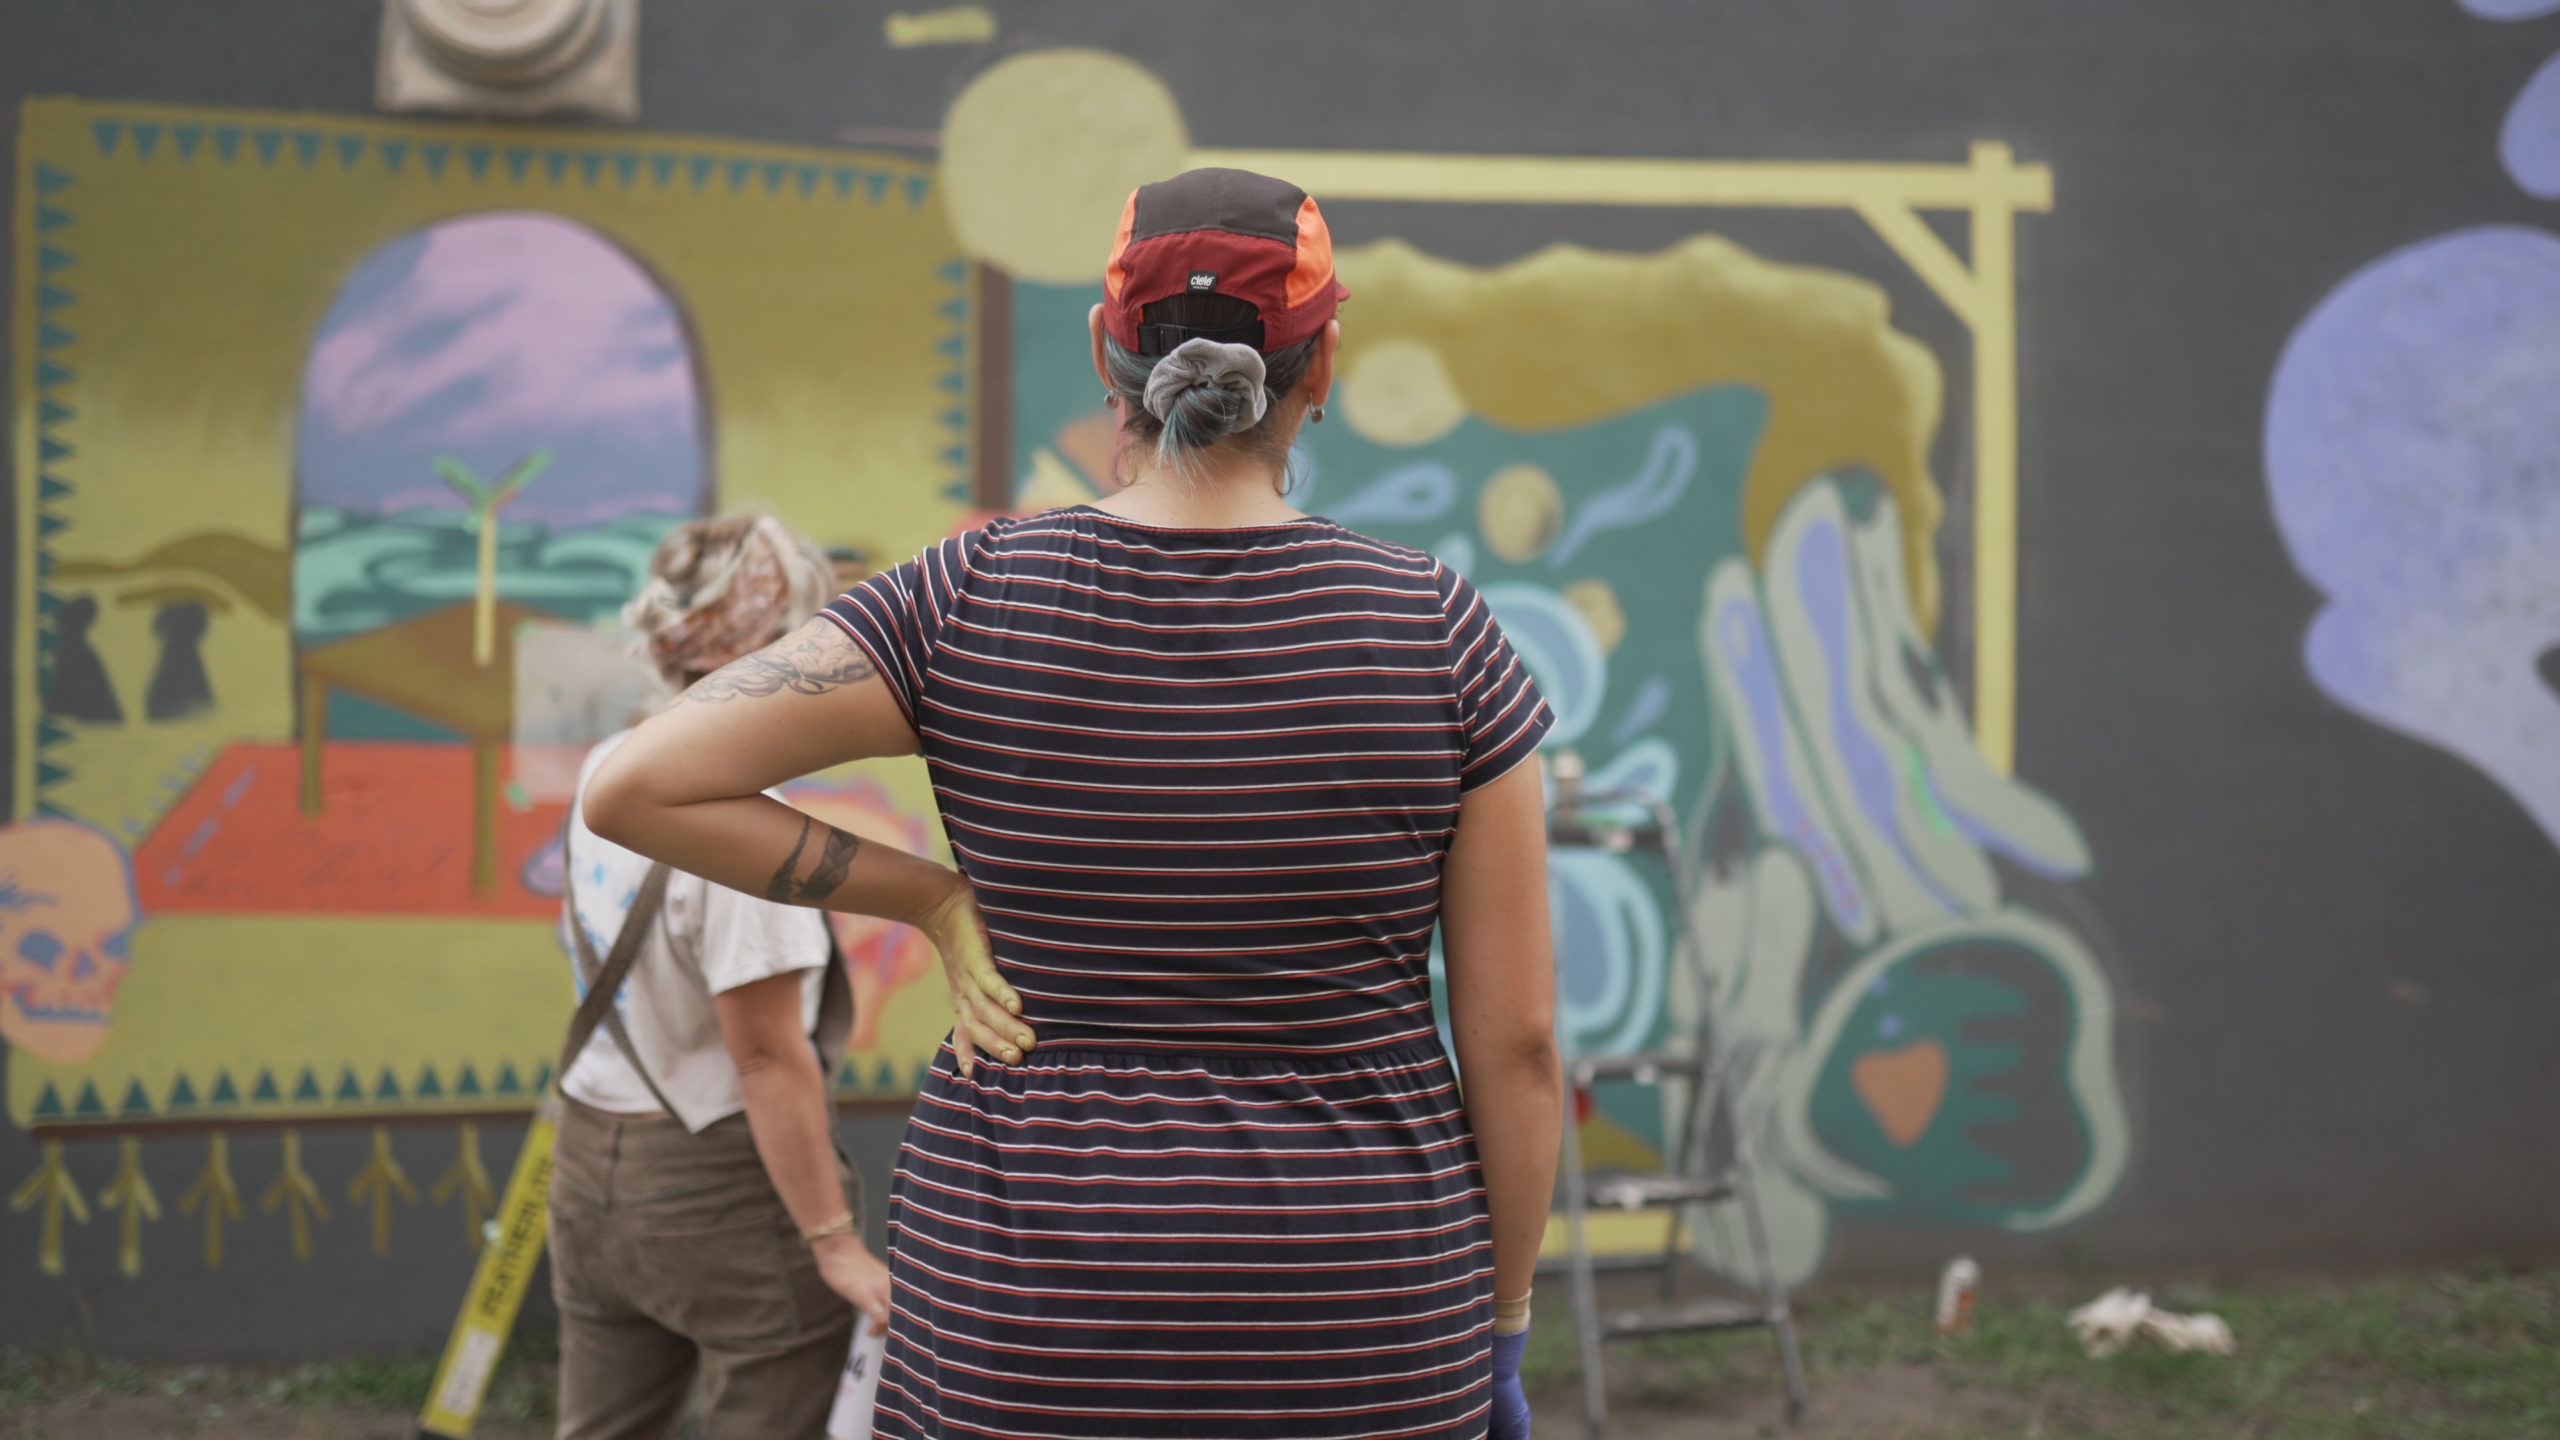 CreateSpace artist Shelby mentor wearing a striped dress and orange hat, look at her mural. Her left hand is on her hip and the other is straight, and her hair is tied into a bun. Her mentor Lora Northway is visible on the left and the mural has muted colours of yellow, teal, purple and red.